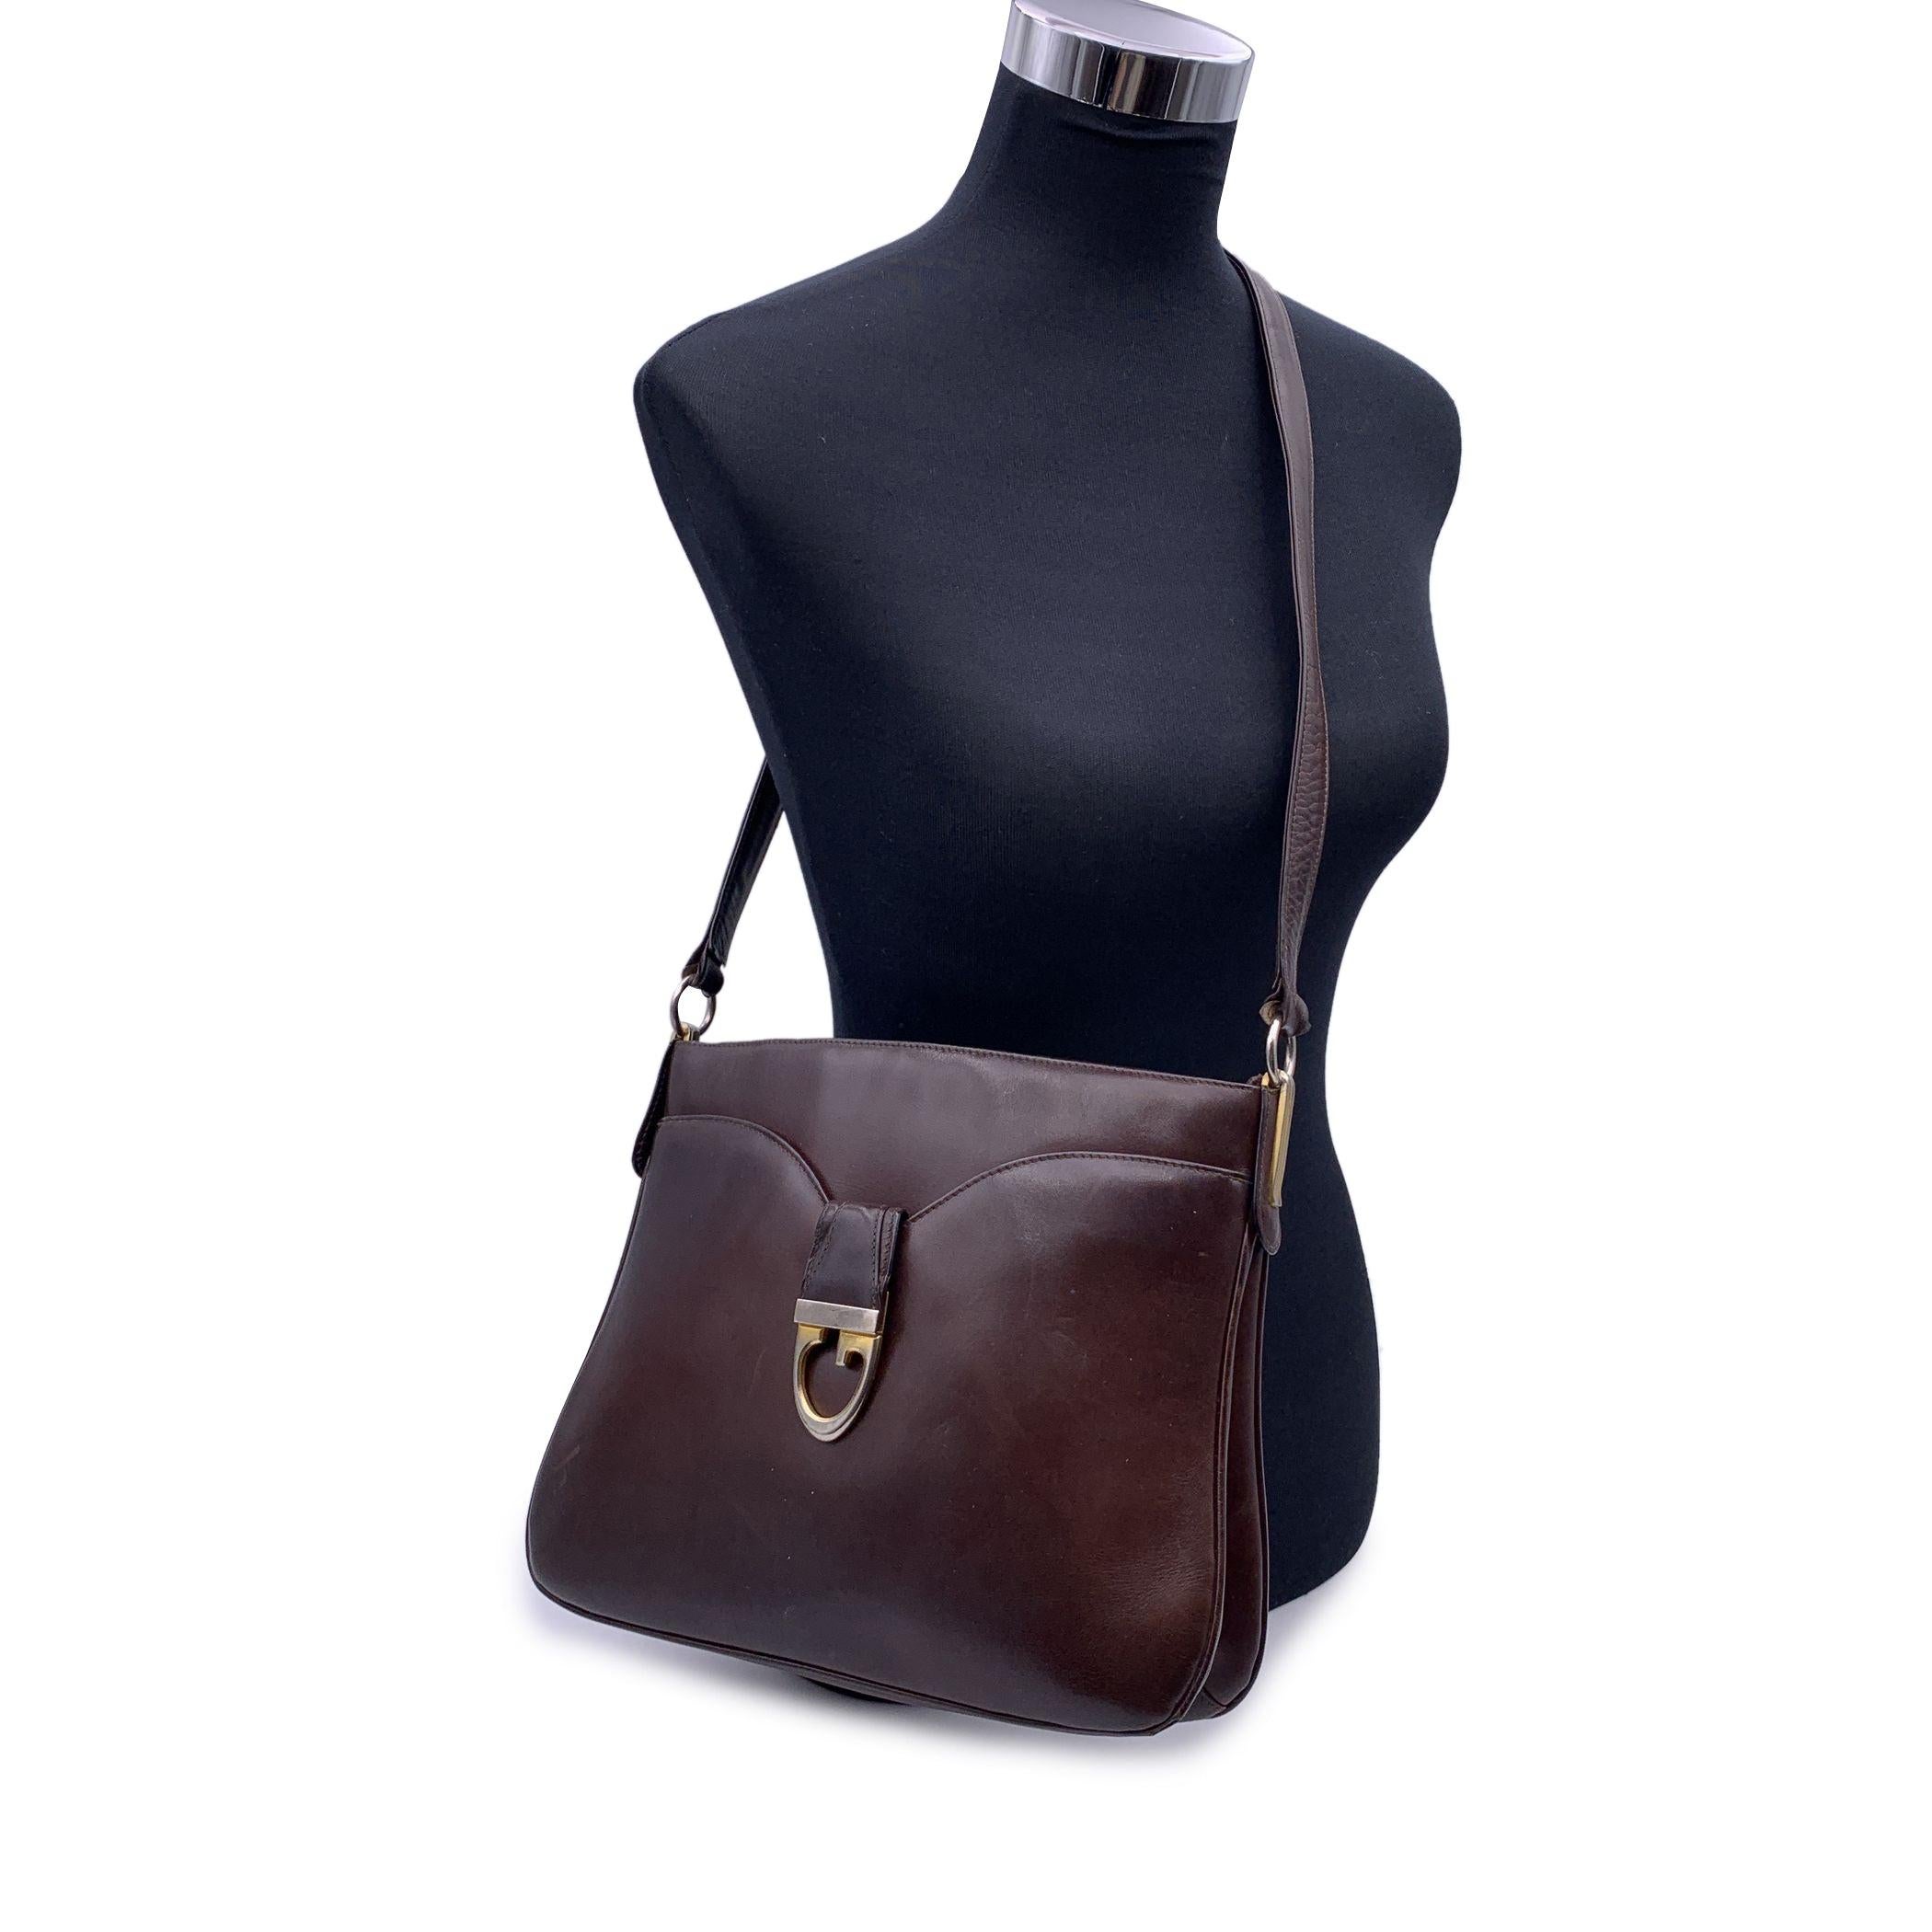 Beautiful Gucci shoulder bag, crafted in dark brown leather. Gold metal hardware. 1 front pocket. 2 main sections with 1 middle zip section. Brown leather lining. Adjustable shoulder strap in 2 lenght. 'Made in Italy by Gucci' embossed inside